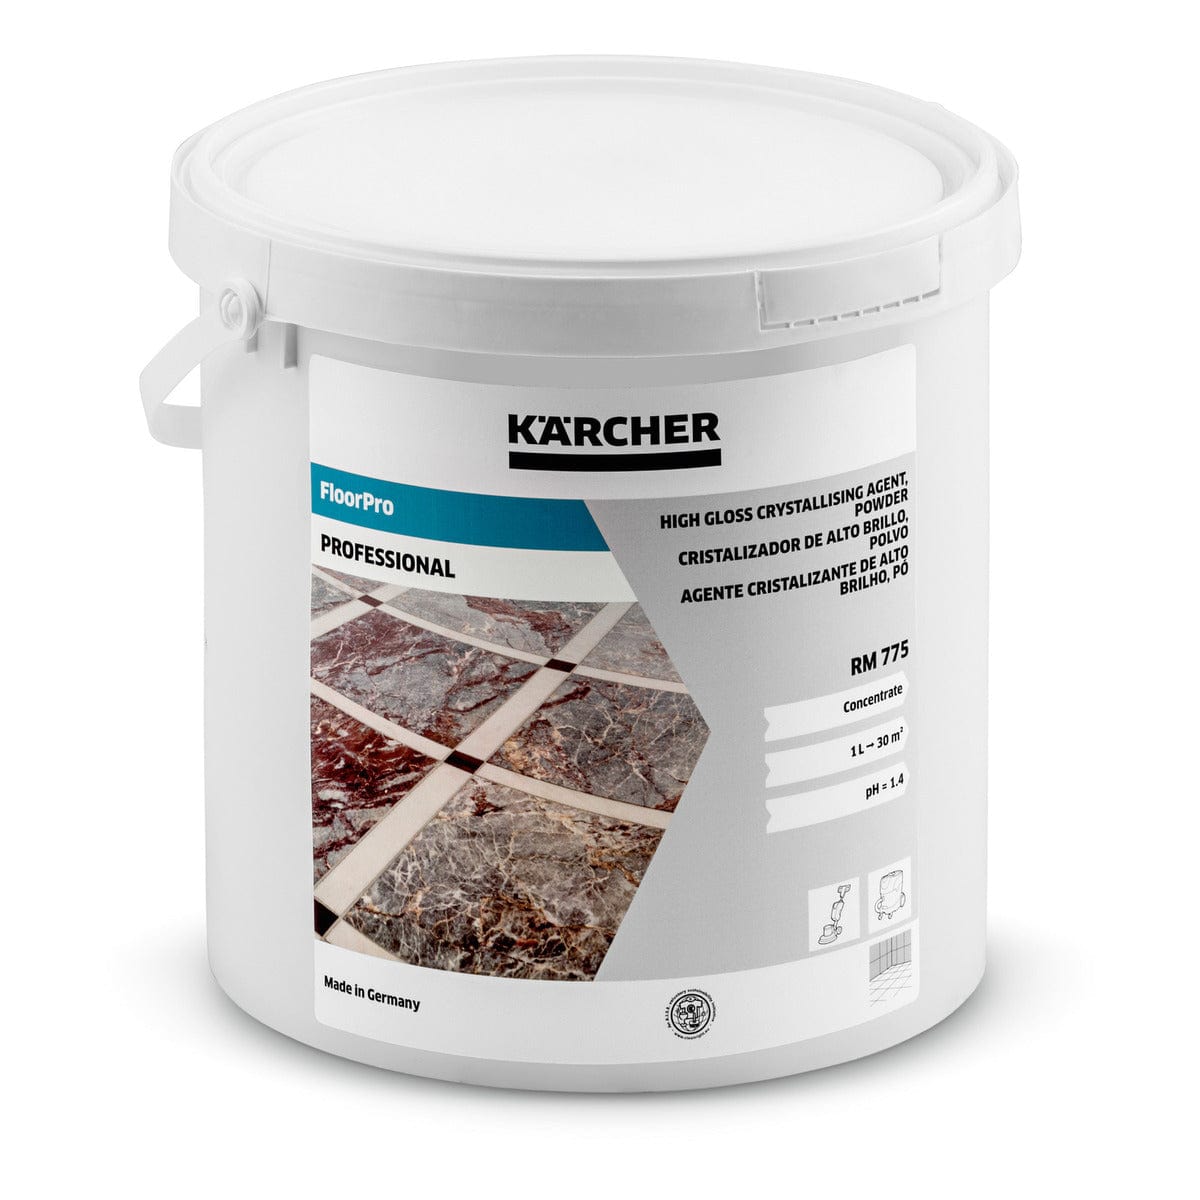 Karcher FloorPro High Gloss Crystallising Agent Powder 5Kg - RM 775 | Supply Master | Accra, Ghana Cleaning Equipment Accessories Buy Tools hardware Building materials